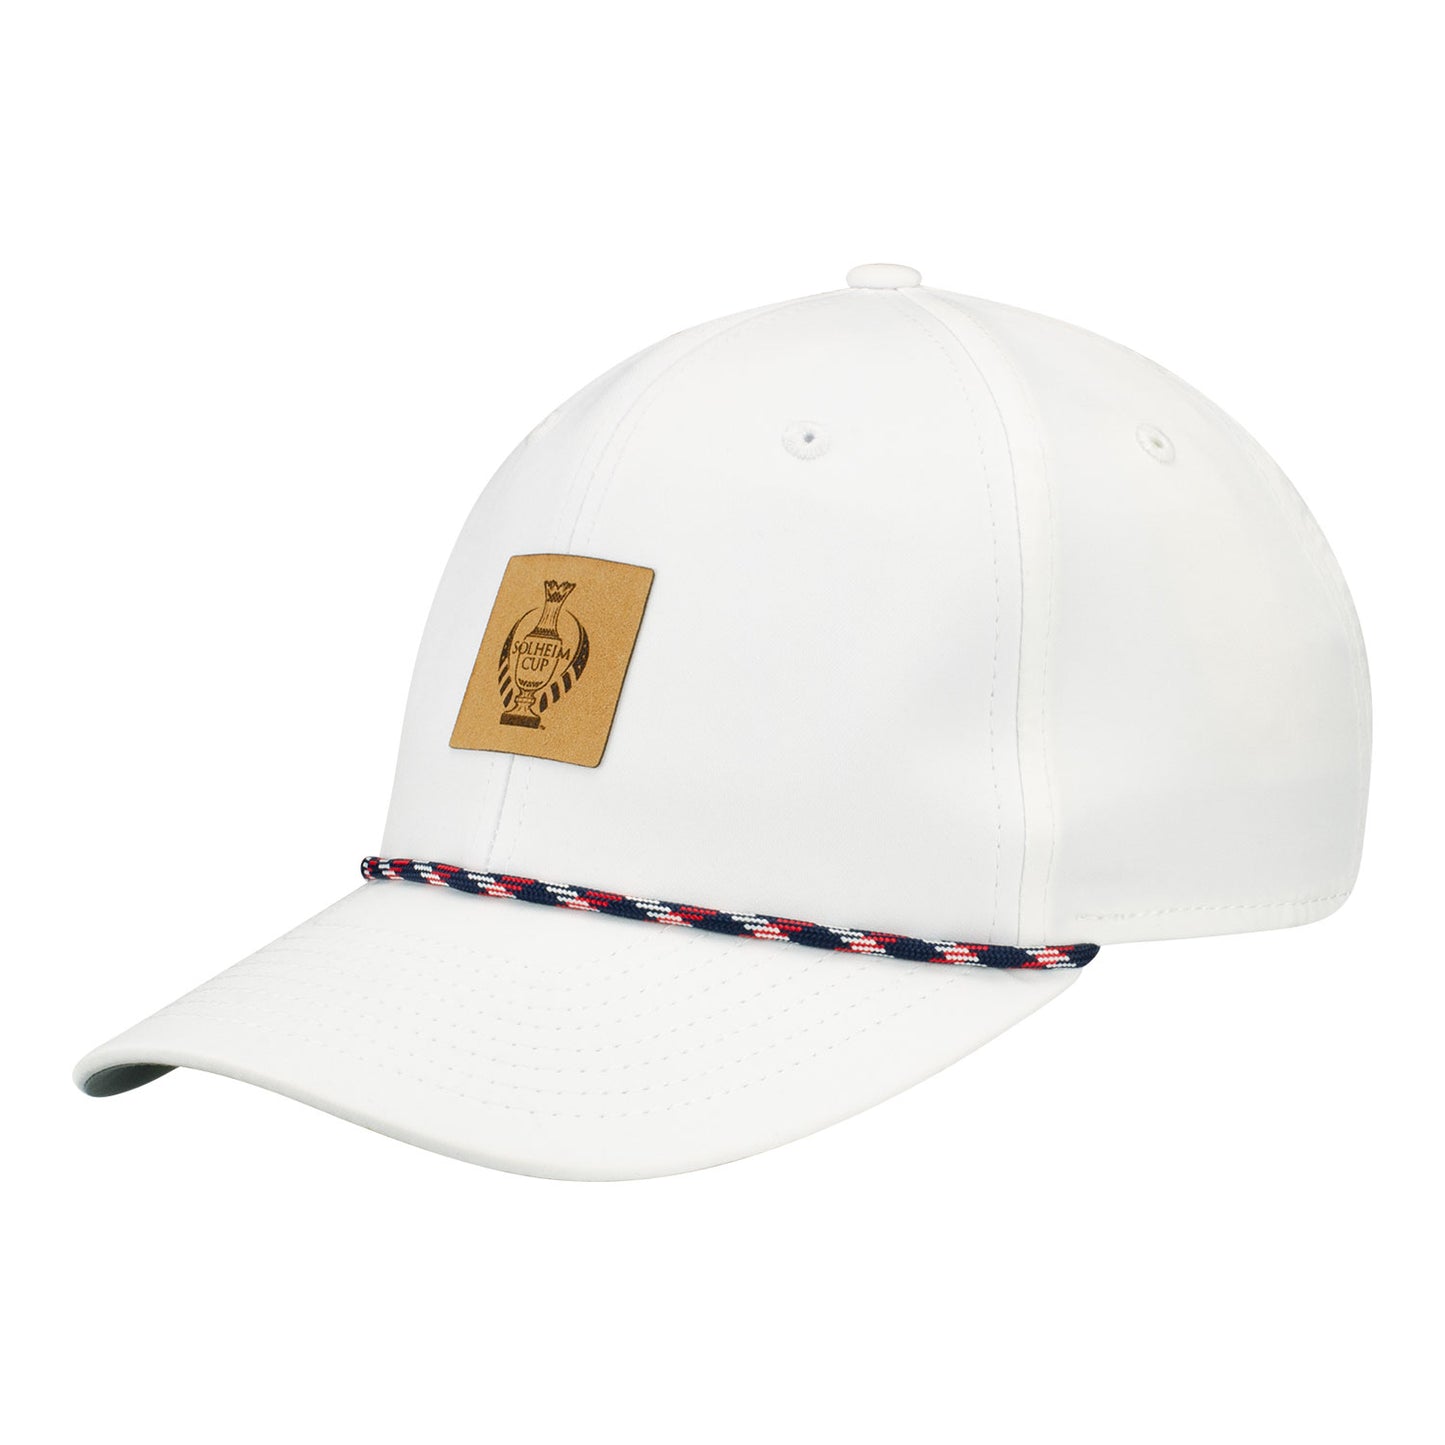 Imperial LPGA Men's Rope Hat featuring the Solheim Cup Trophy - Angled Left Side View